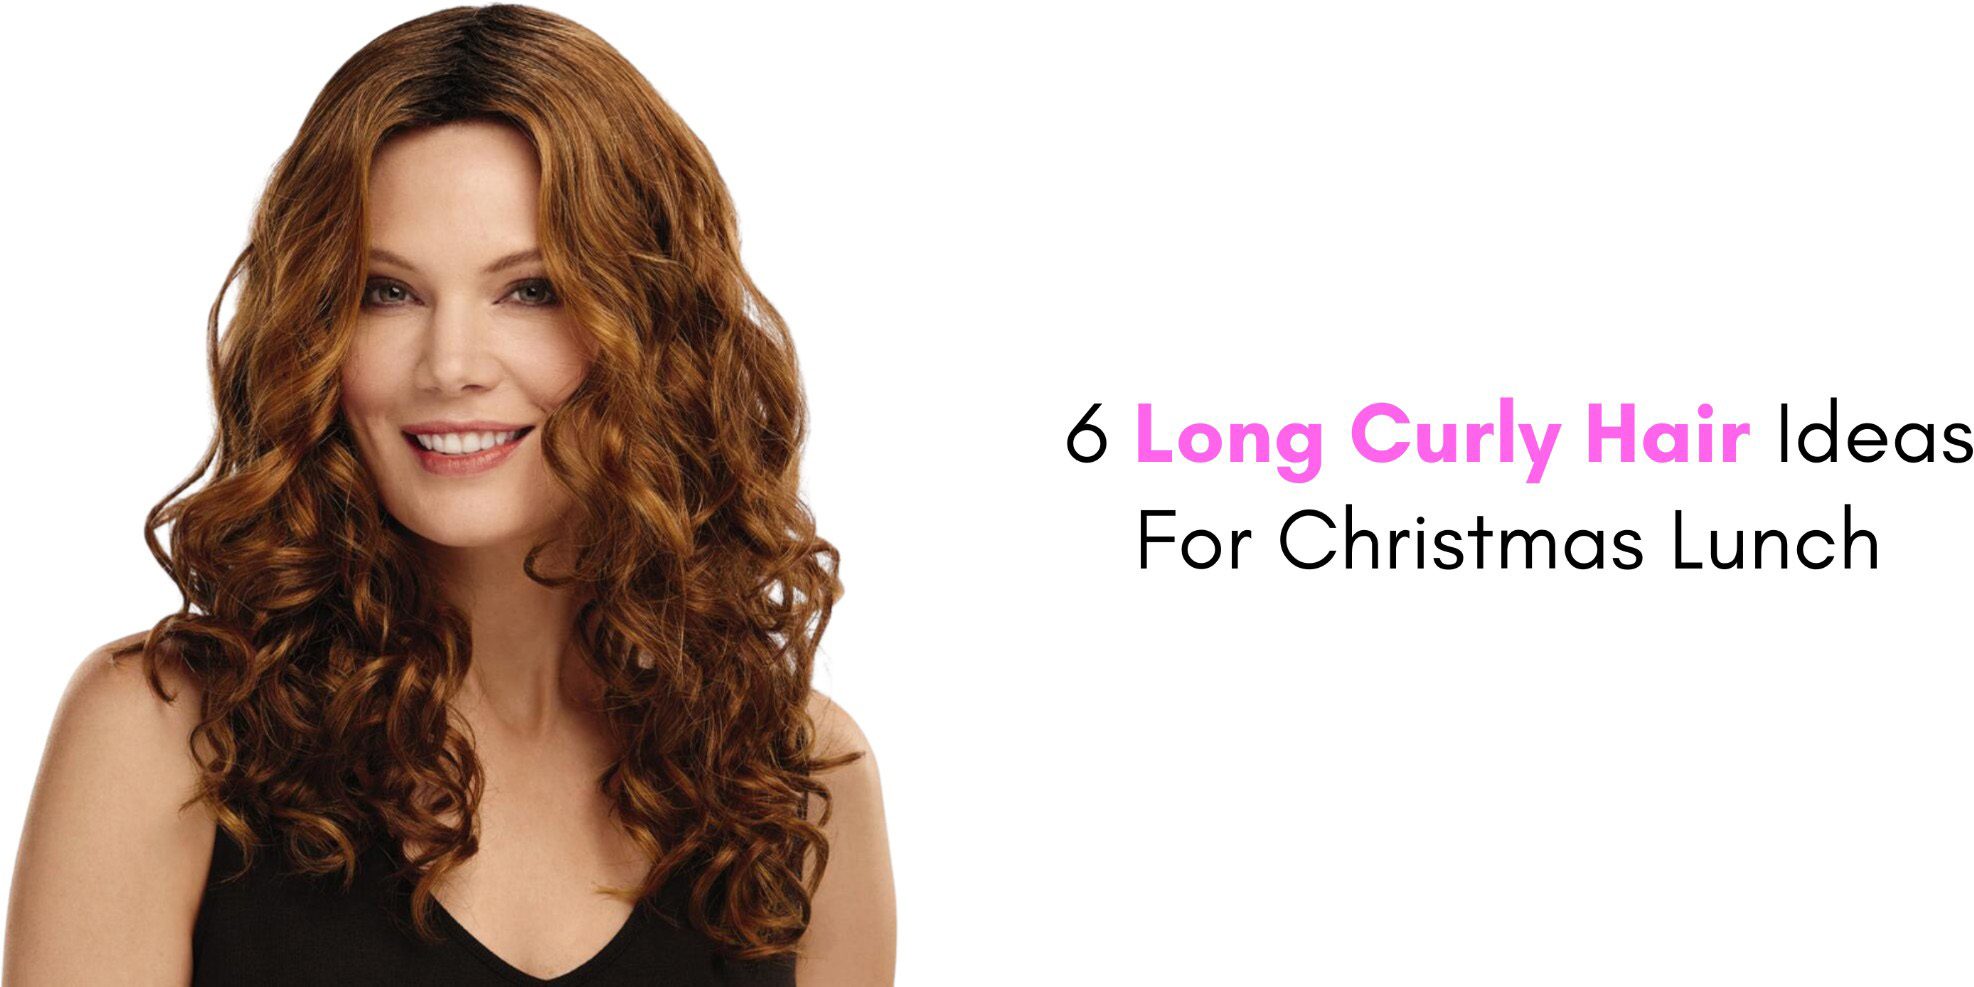 6 long curly hair ideas for christmas lunch